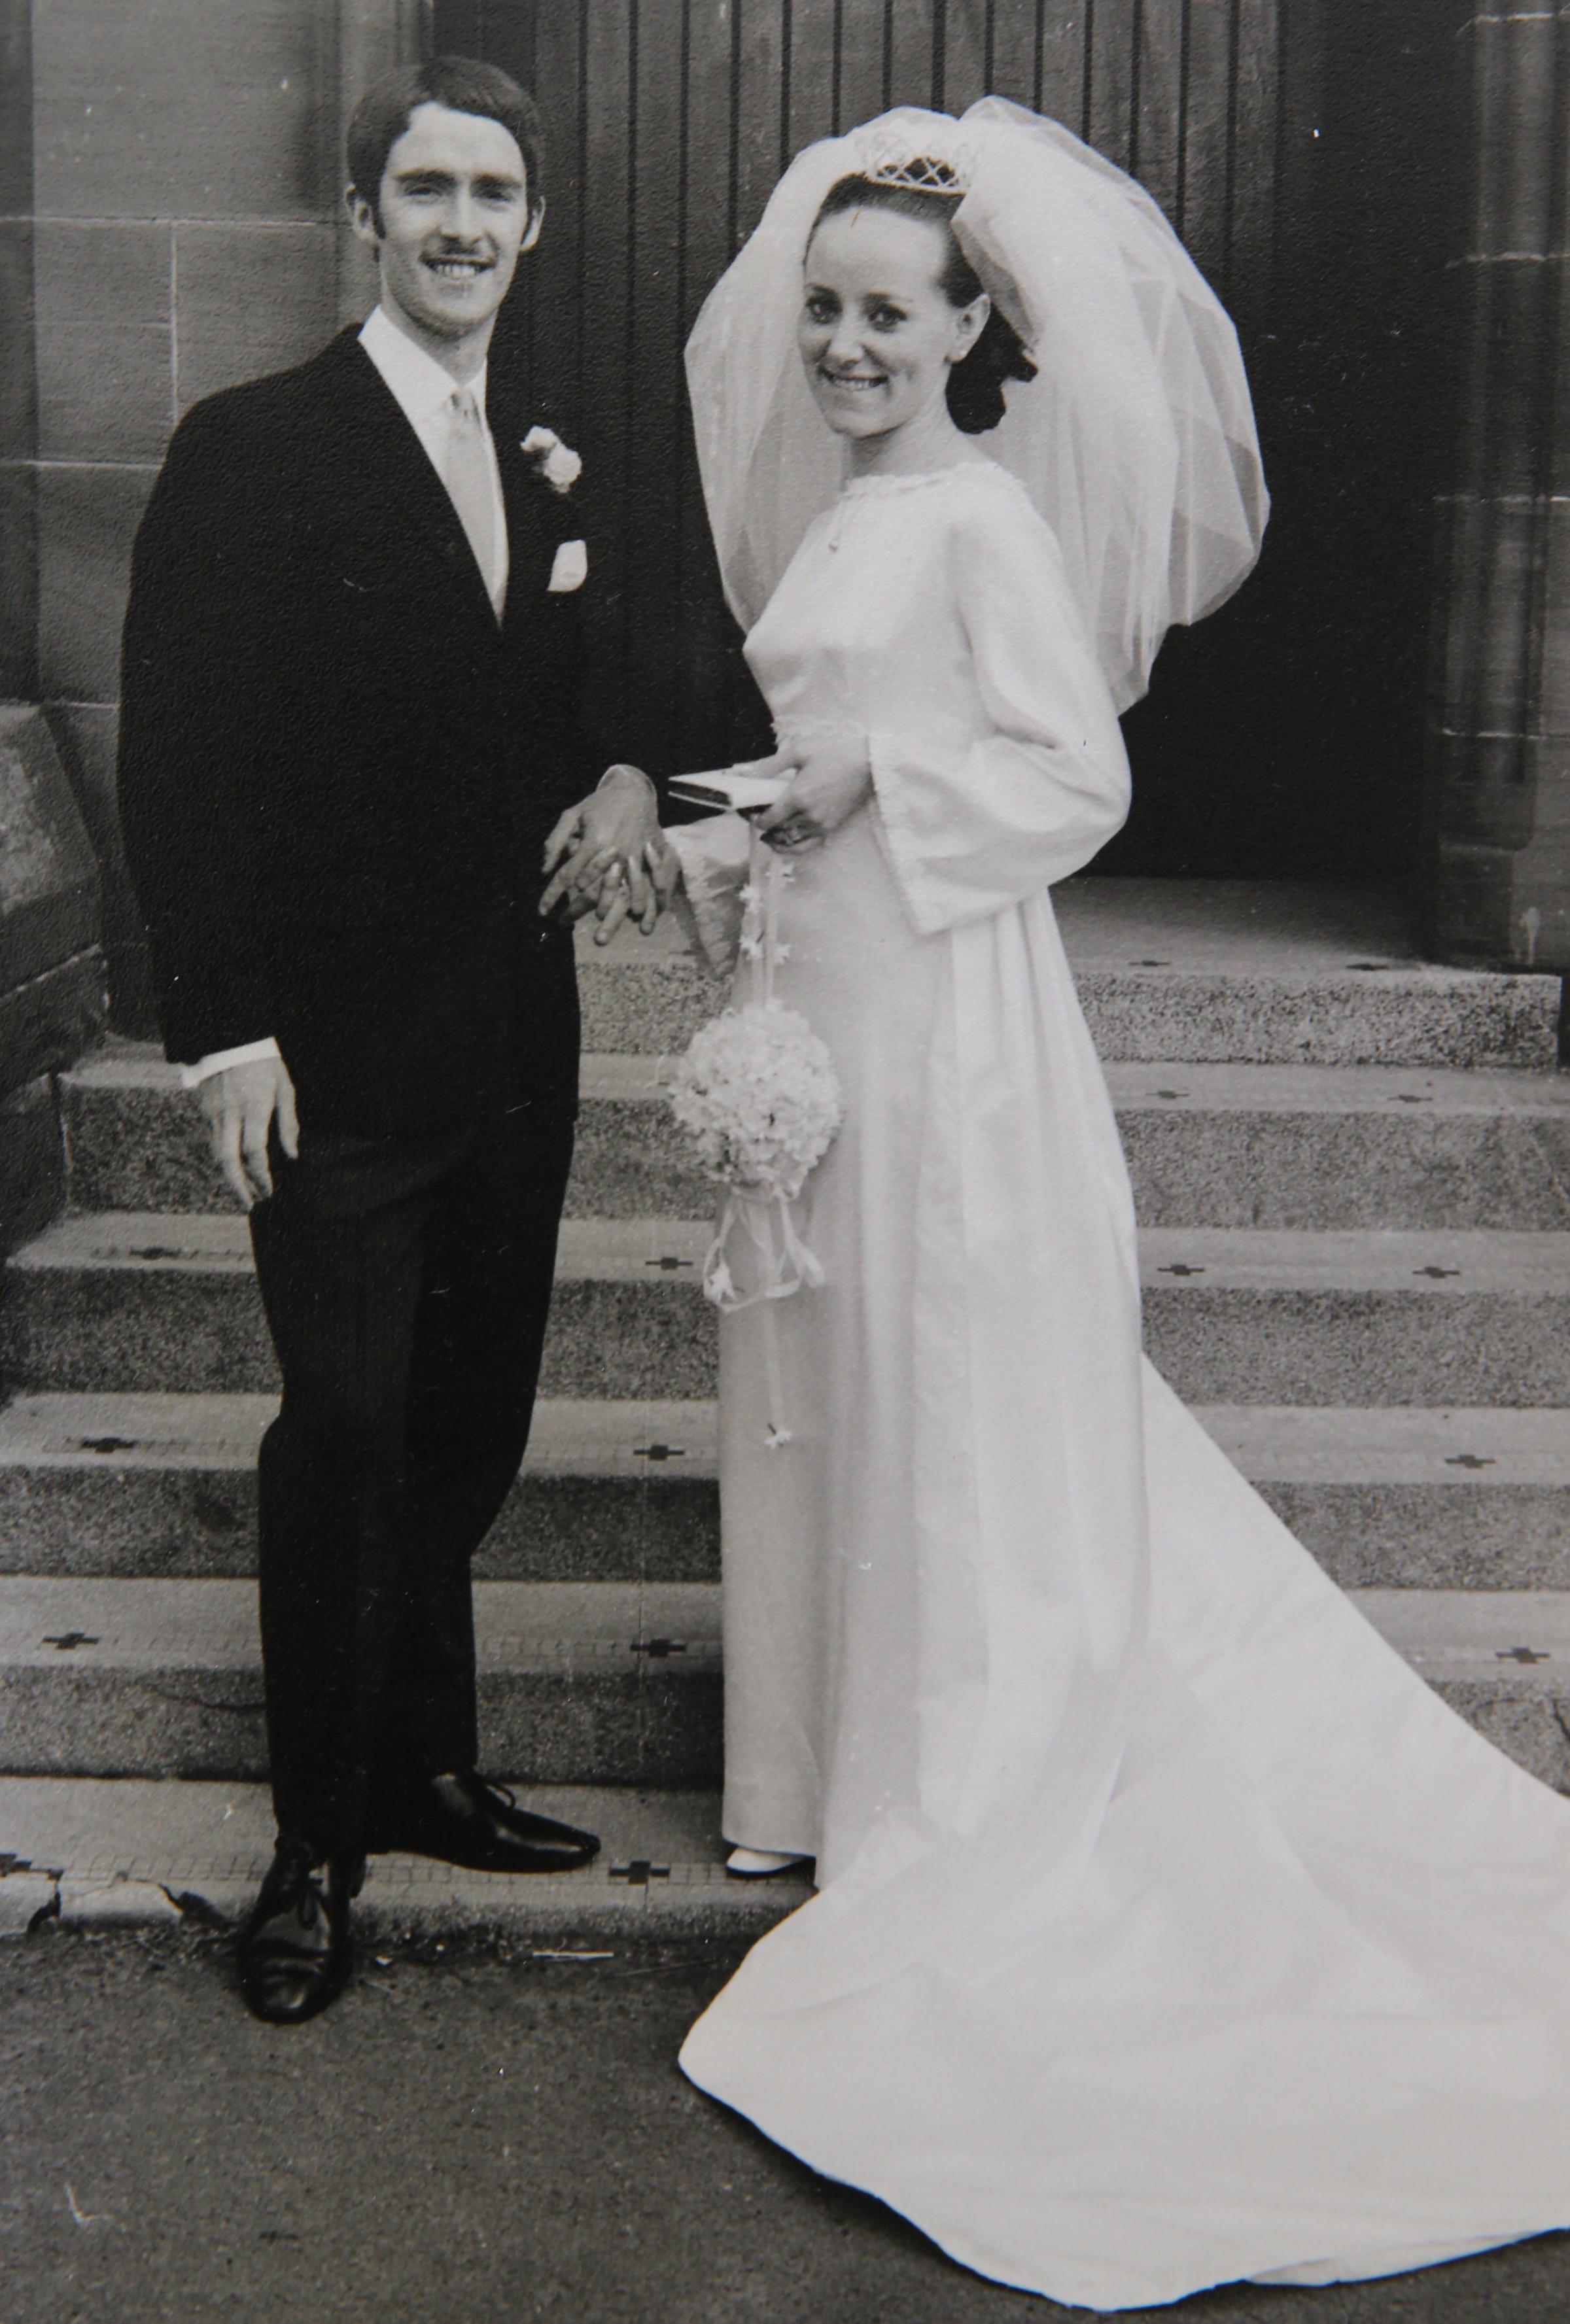 Glasgow Times past feature. Isabel and Brian McNulty pictured on their wedding day in August 1969... Isabel and Brian McNulty from Milton, Glasgow have been together for 53 years after meeting at school, courting at the dancing, and marrying at 18. ...5